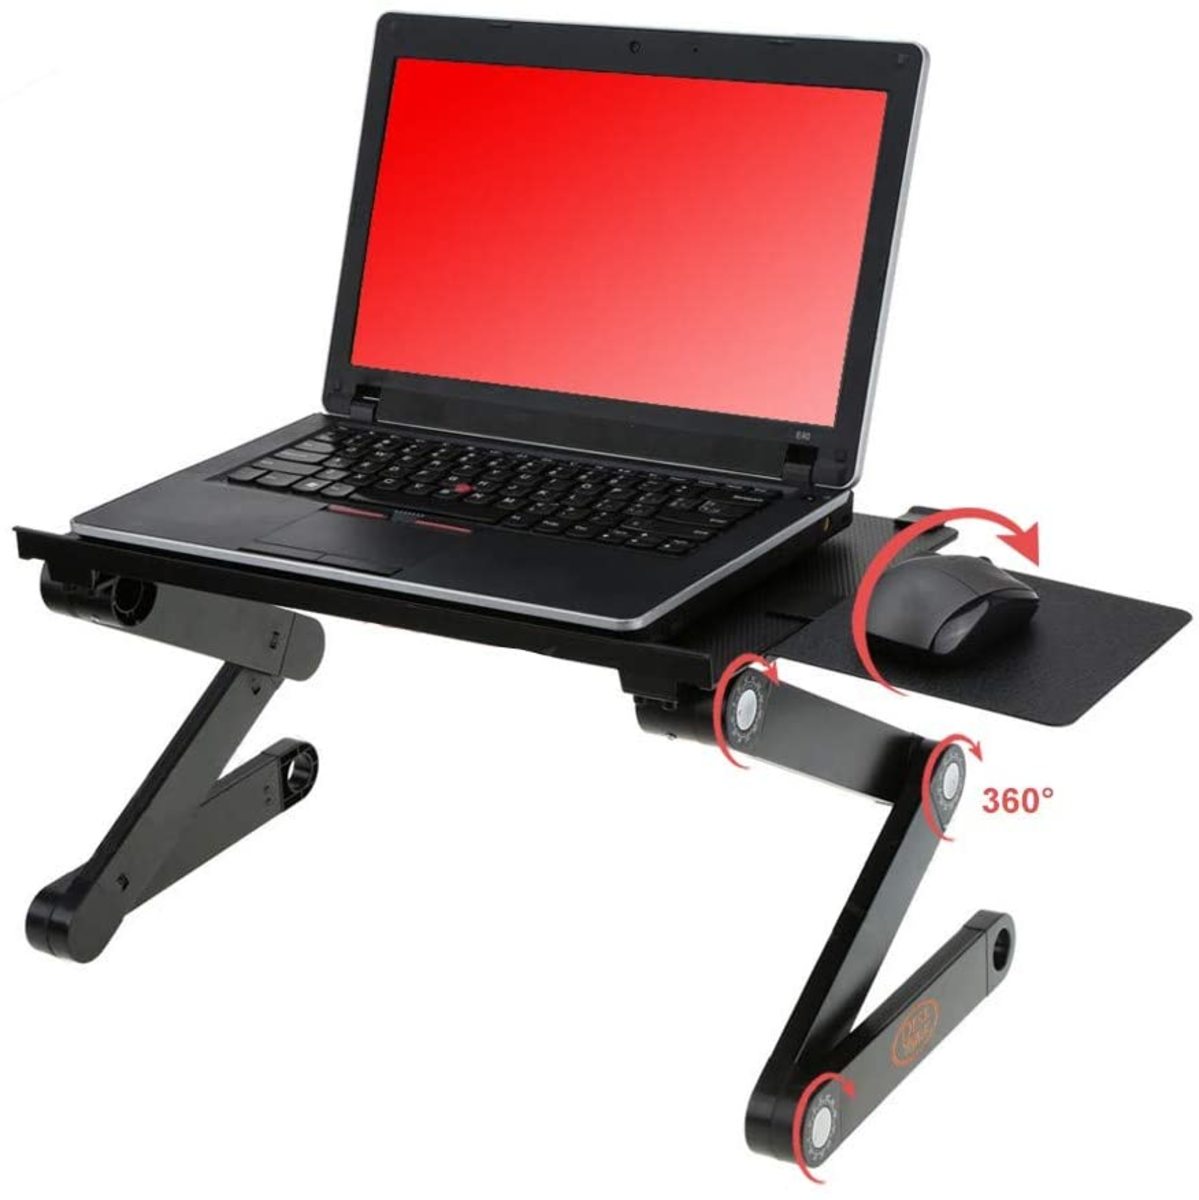 This adjustable laptop stand is perfect for anyone who works at home or watches movies or television in bed. 